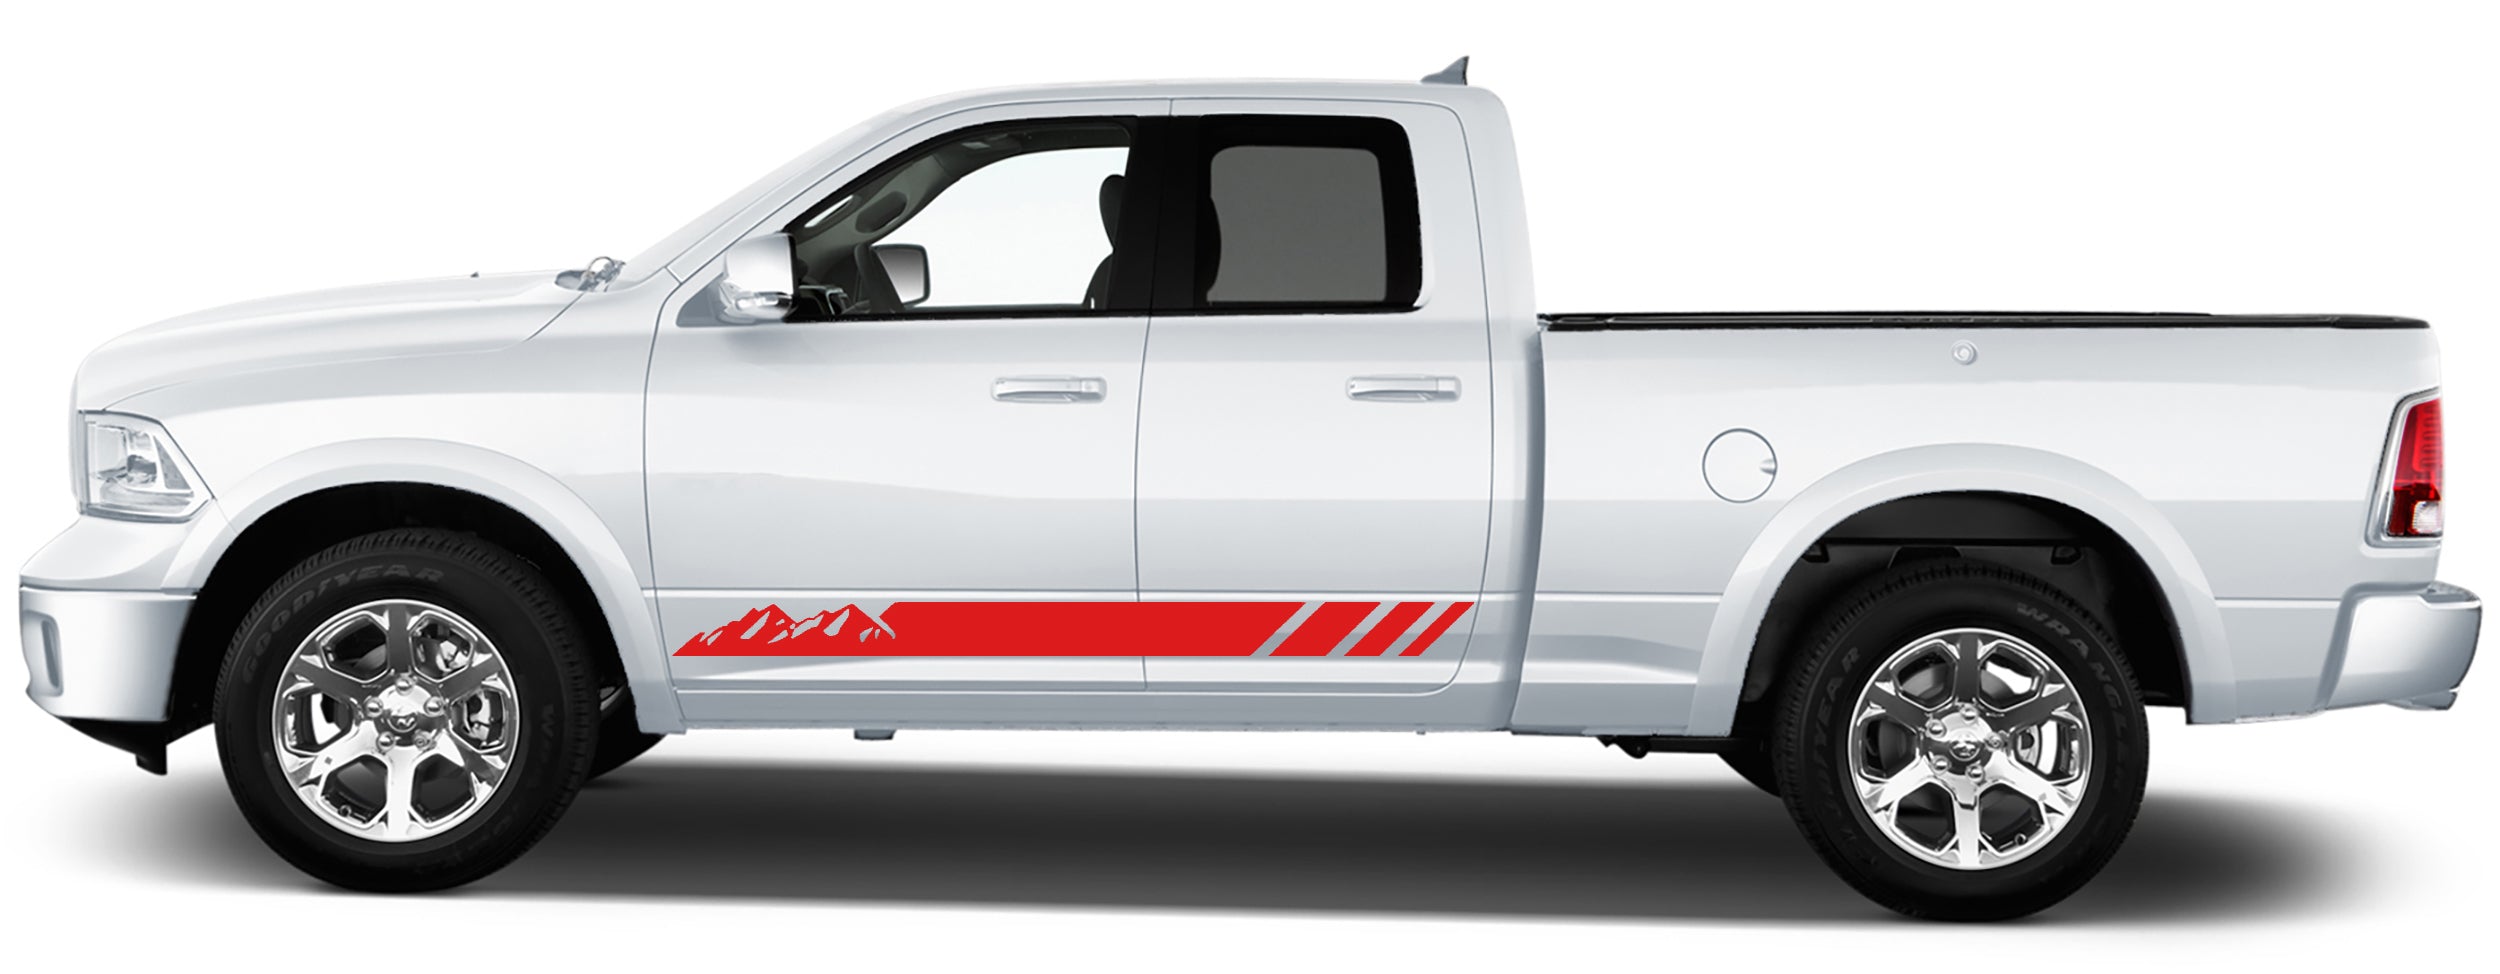 Mountain Rocker Panel Side Stripes Graphics for dodge ram 2008 to 2018 models red